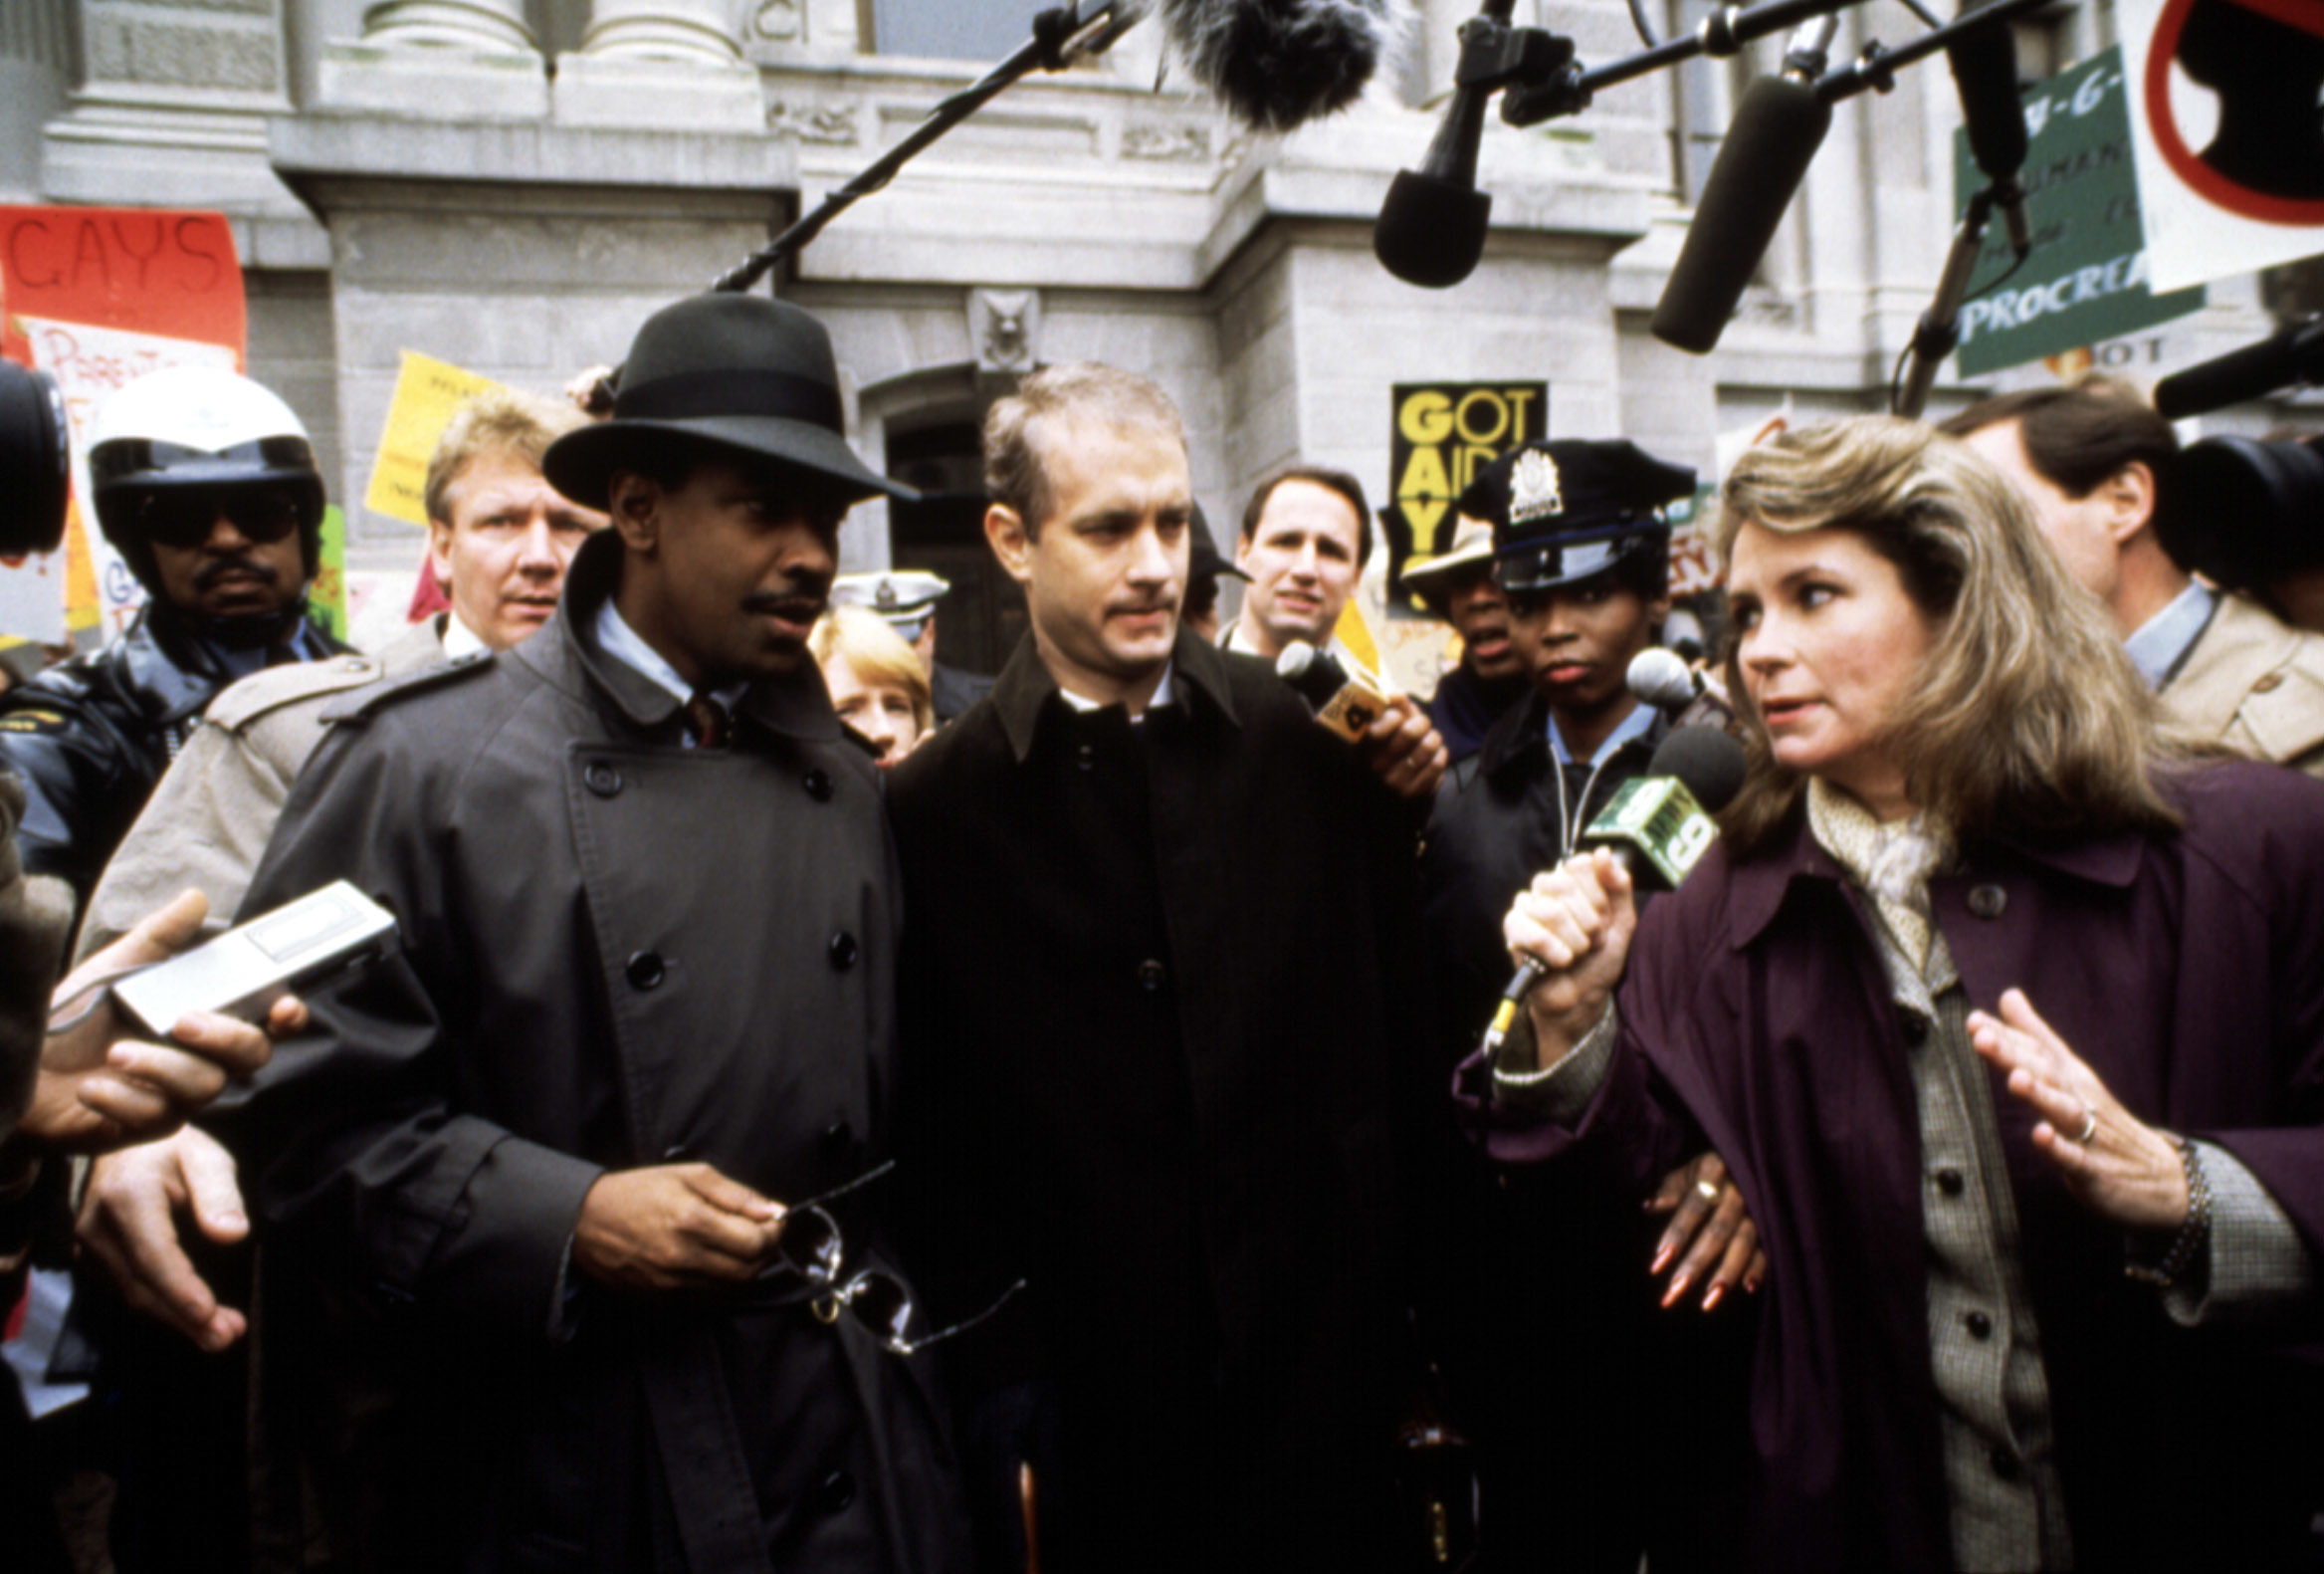 Tom and his lawyer walk through a crowd of press in the film